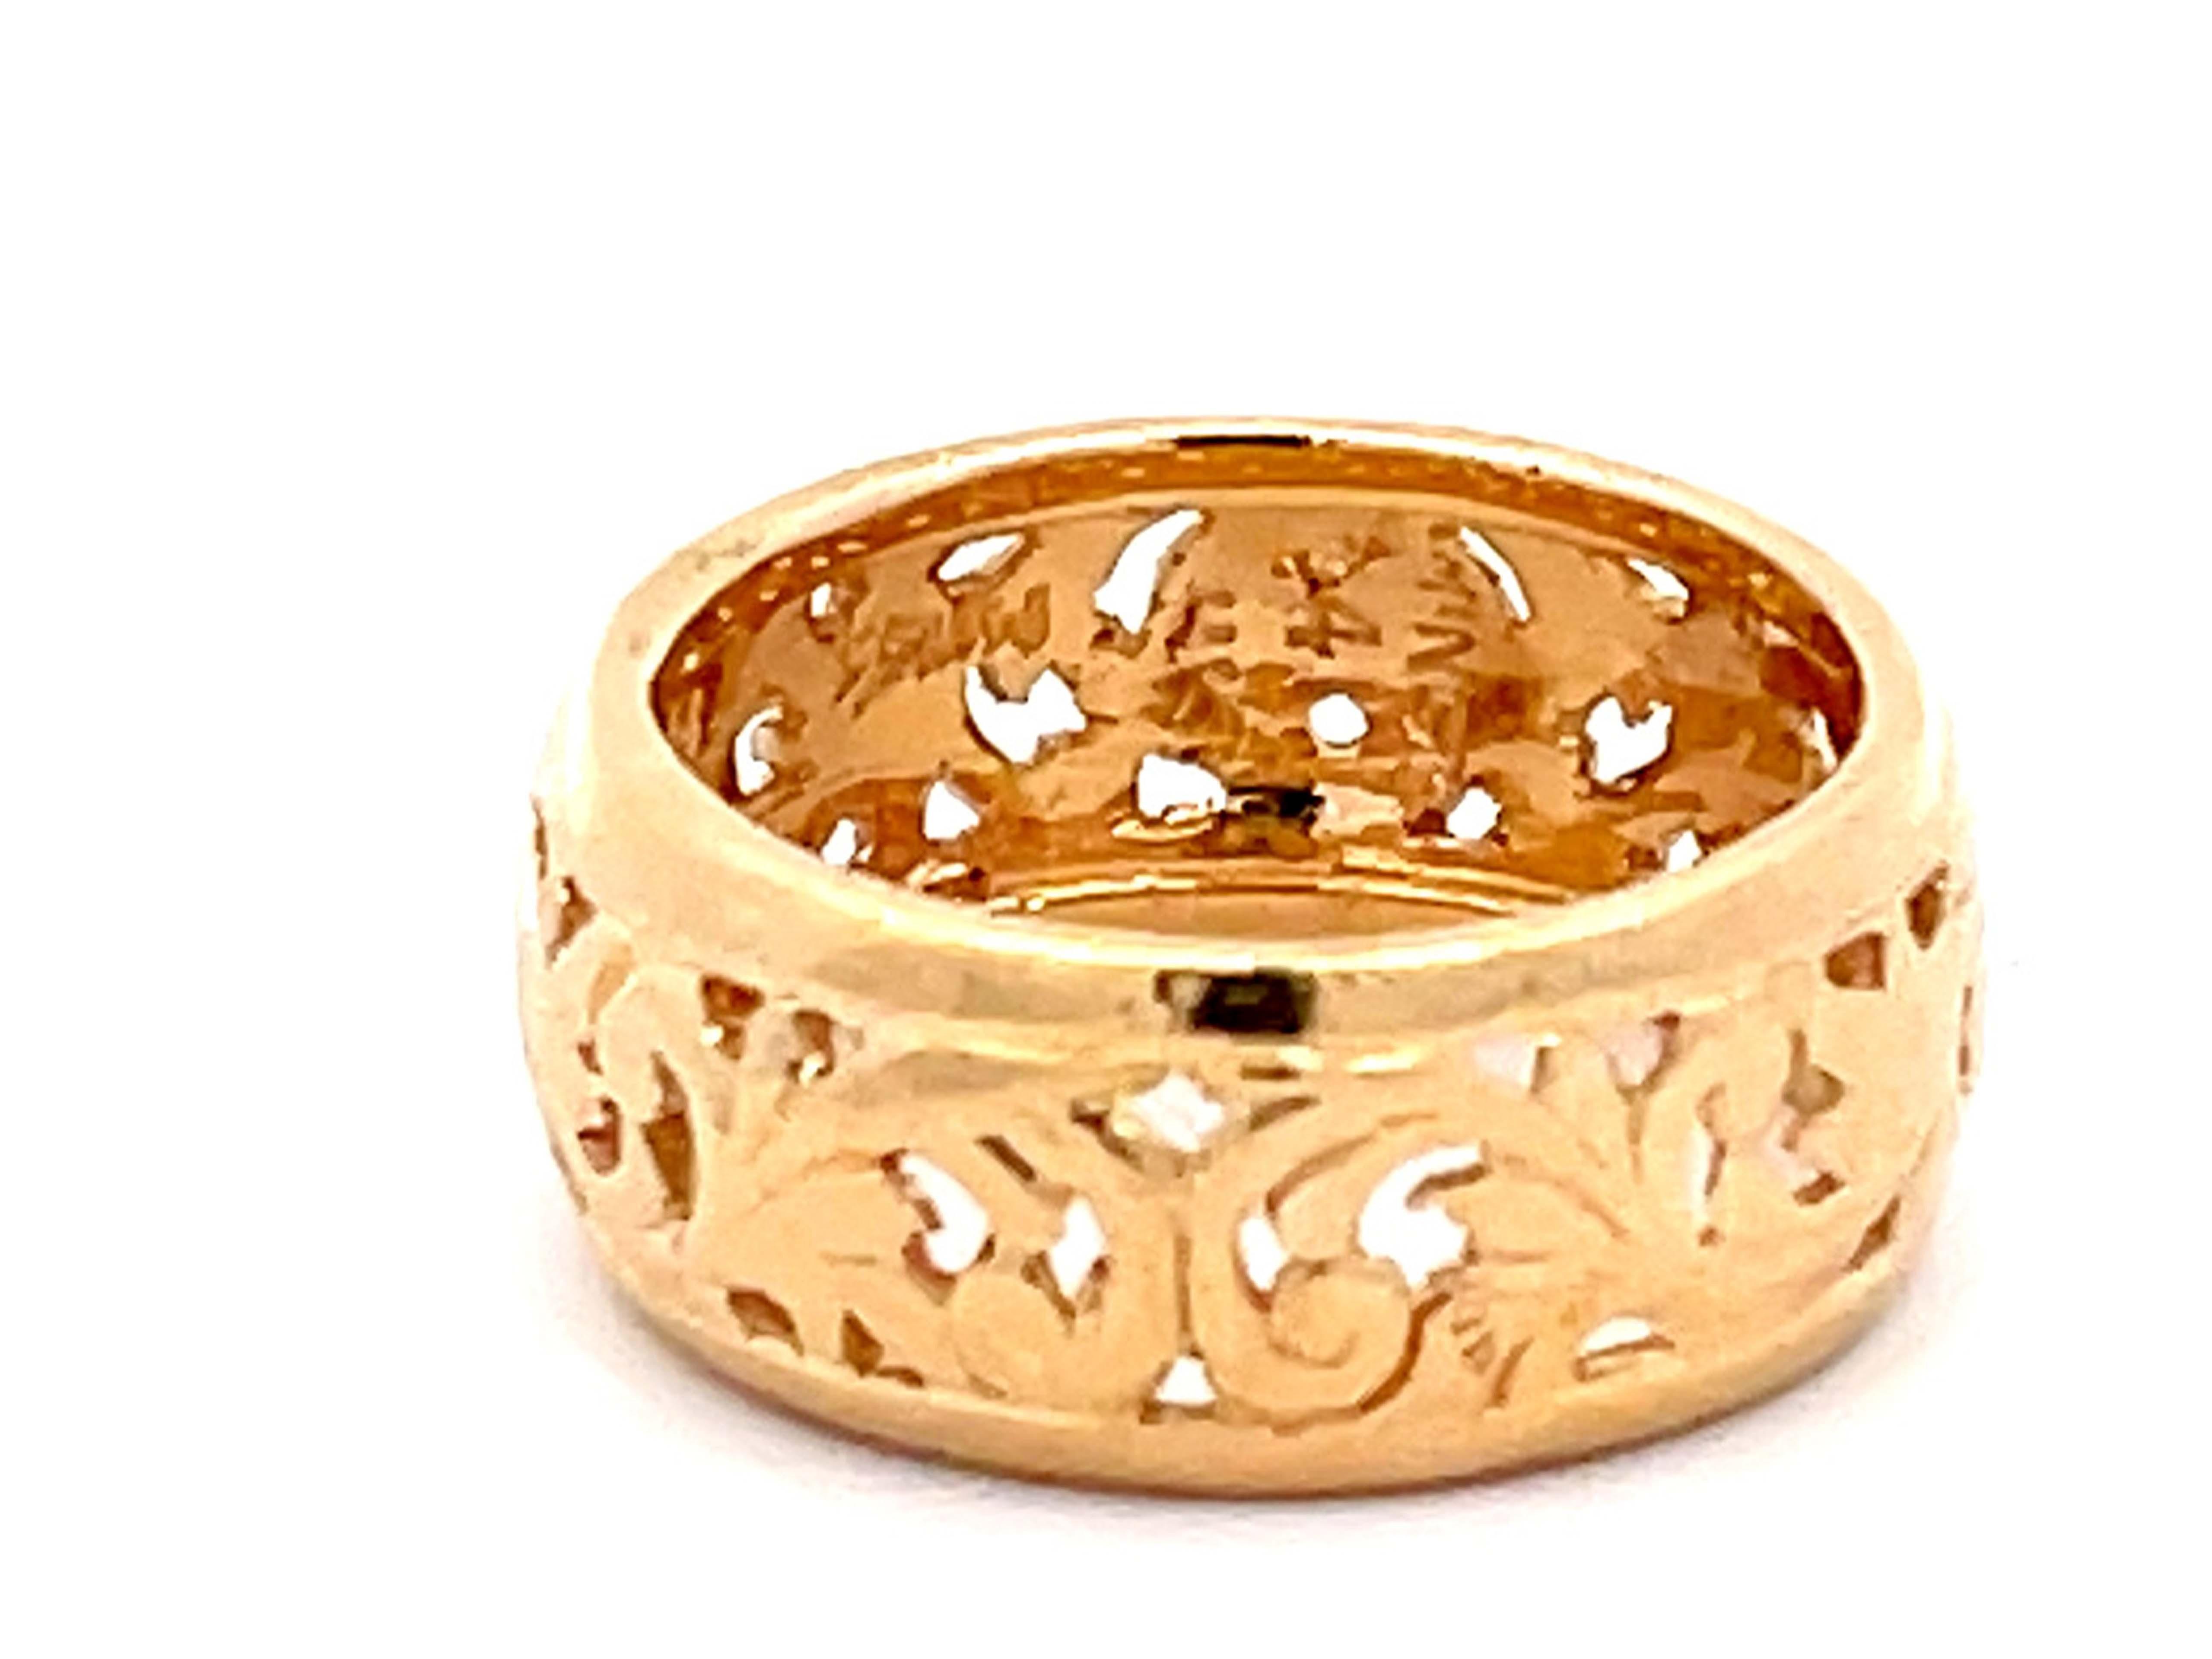 Mings Yin and Yang Cutout Band Ring in 14k Yellow Gold In Excellent Condition For Sale In Honolulu, HI